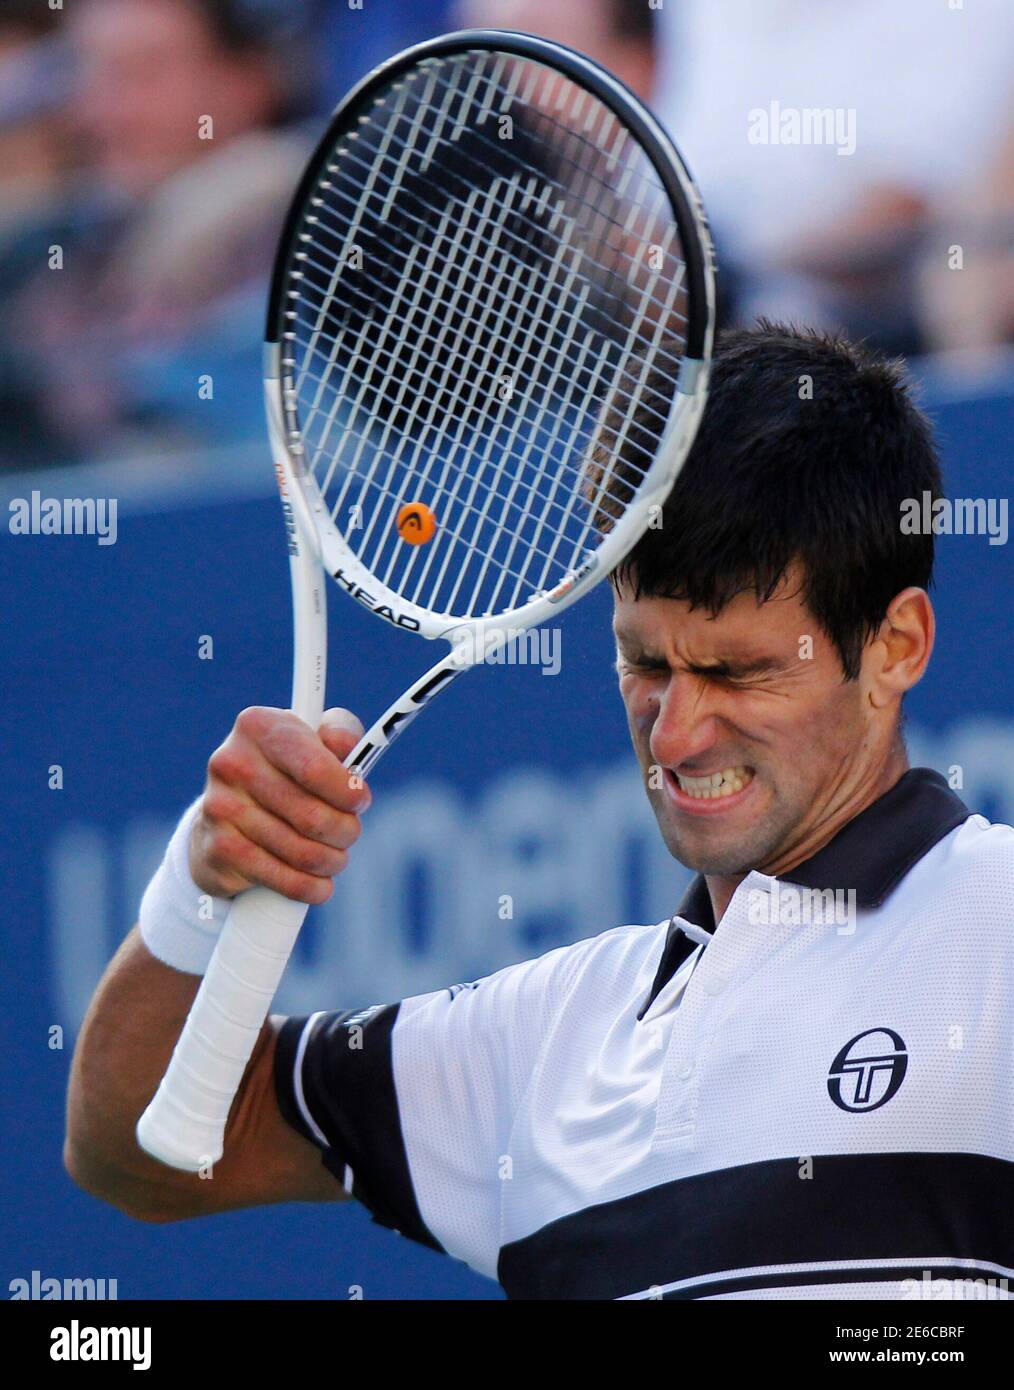 Novak Djokovic of Serbia reacts to a missed shot during his match against  Roger Federer of Switzerland during the U.S. Open tennis tournament in New  York September 11, 2010. REUTERS/Eduardo Munoz (UNITED